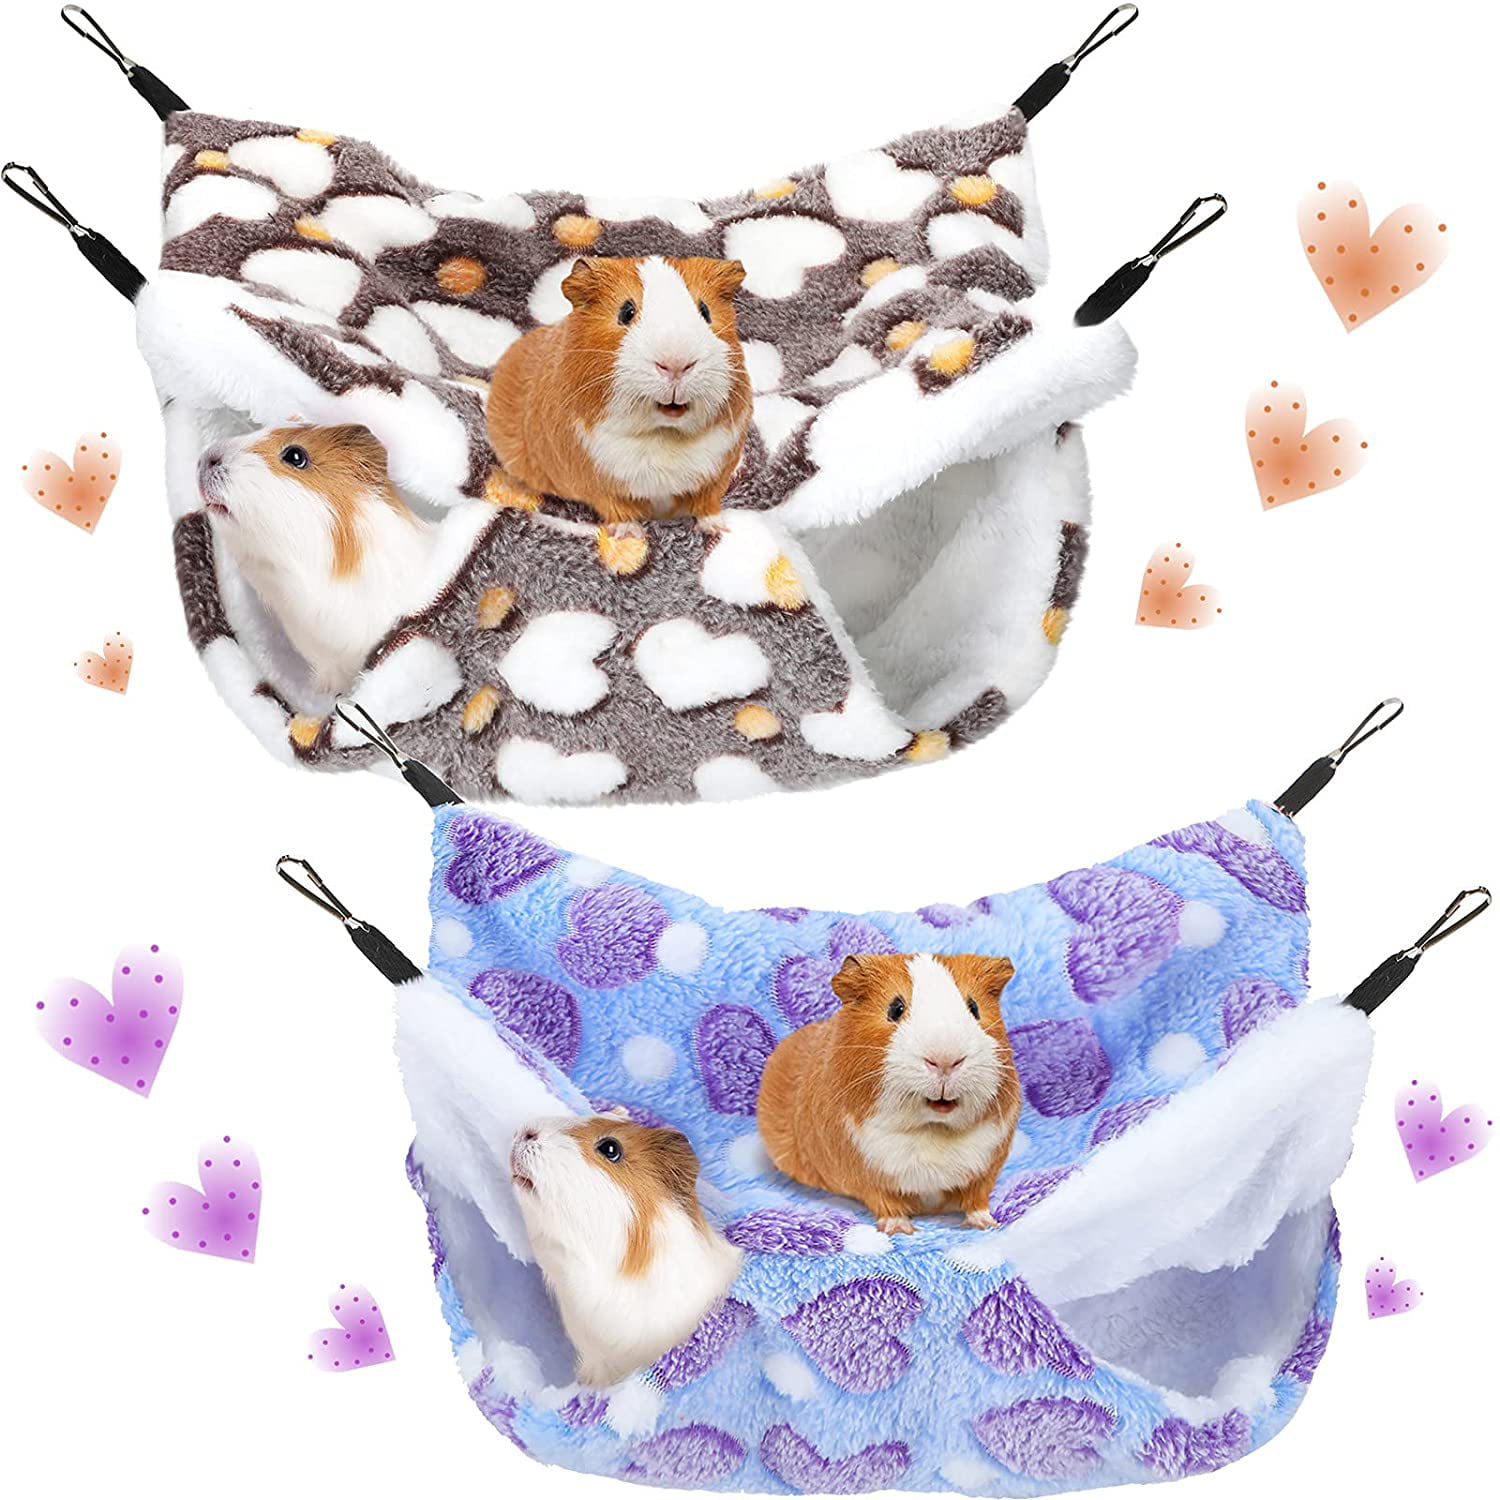 Small Animal Cage Hammock,Hanging Double Bunk Bed for Hamster Guinea Pig Gerbil Chinchilla Sugar Glider Mice Bunny Squirrel Ferret Hedgehog Hideout Playing Sleepping Cage Accessories 